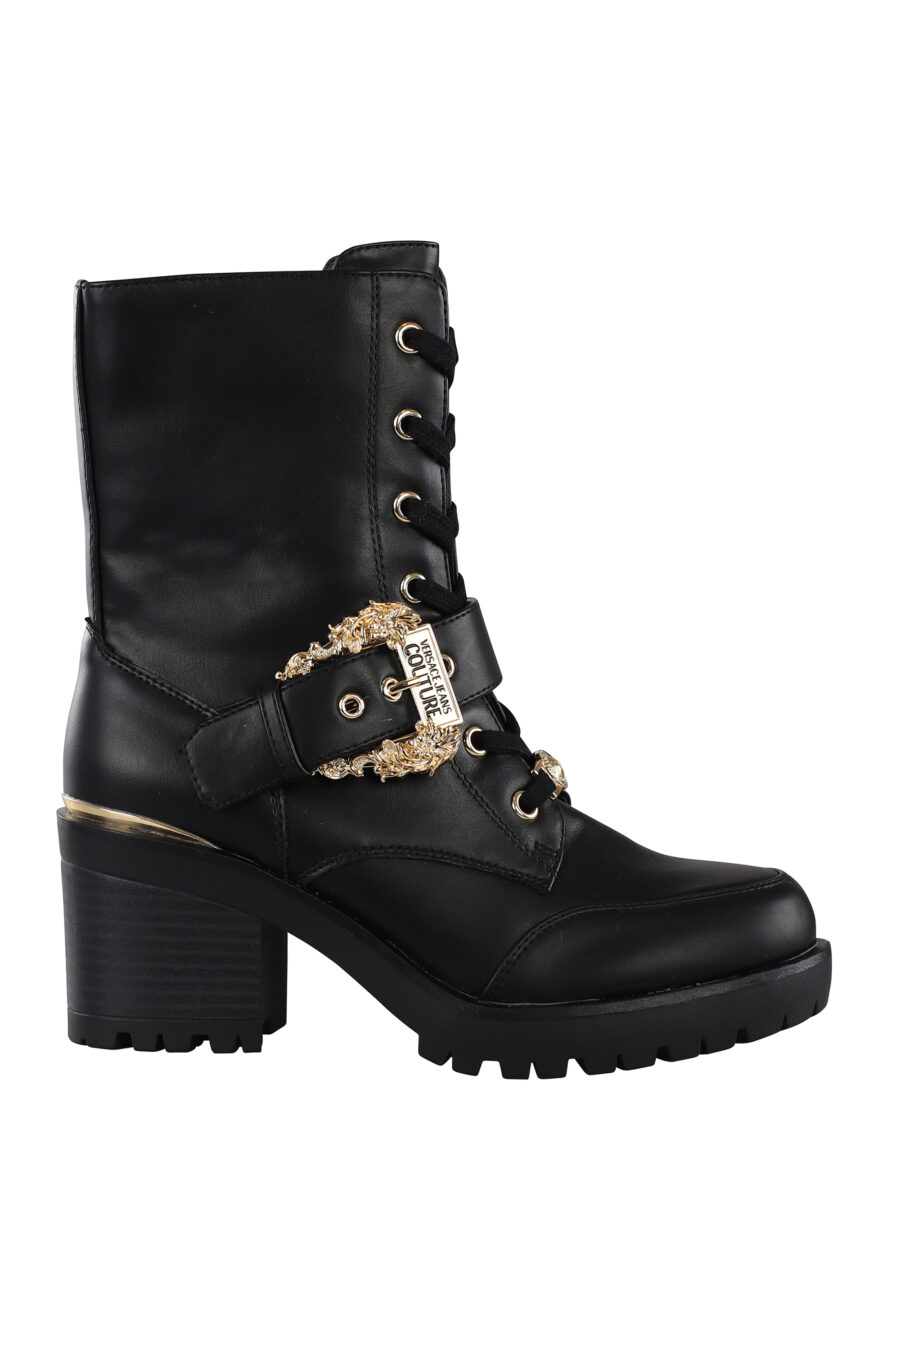 Black boots with baroque buckle and heel - IMG 7127